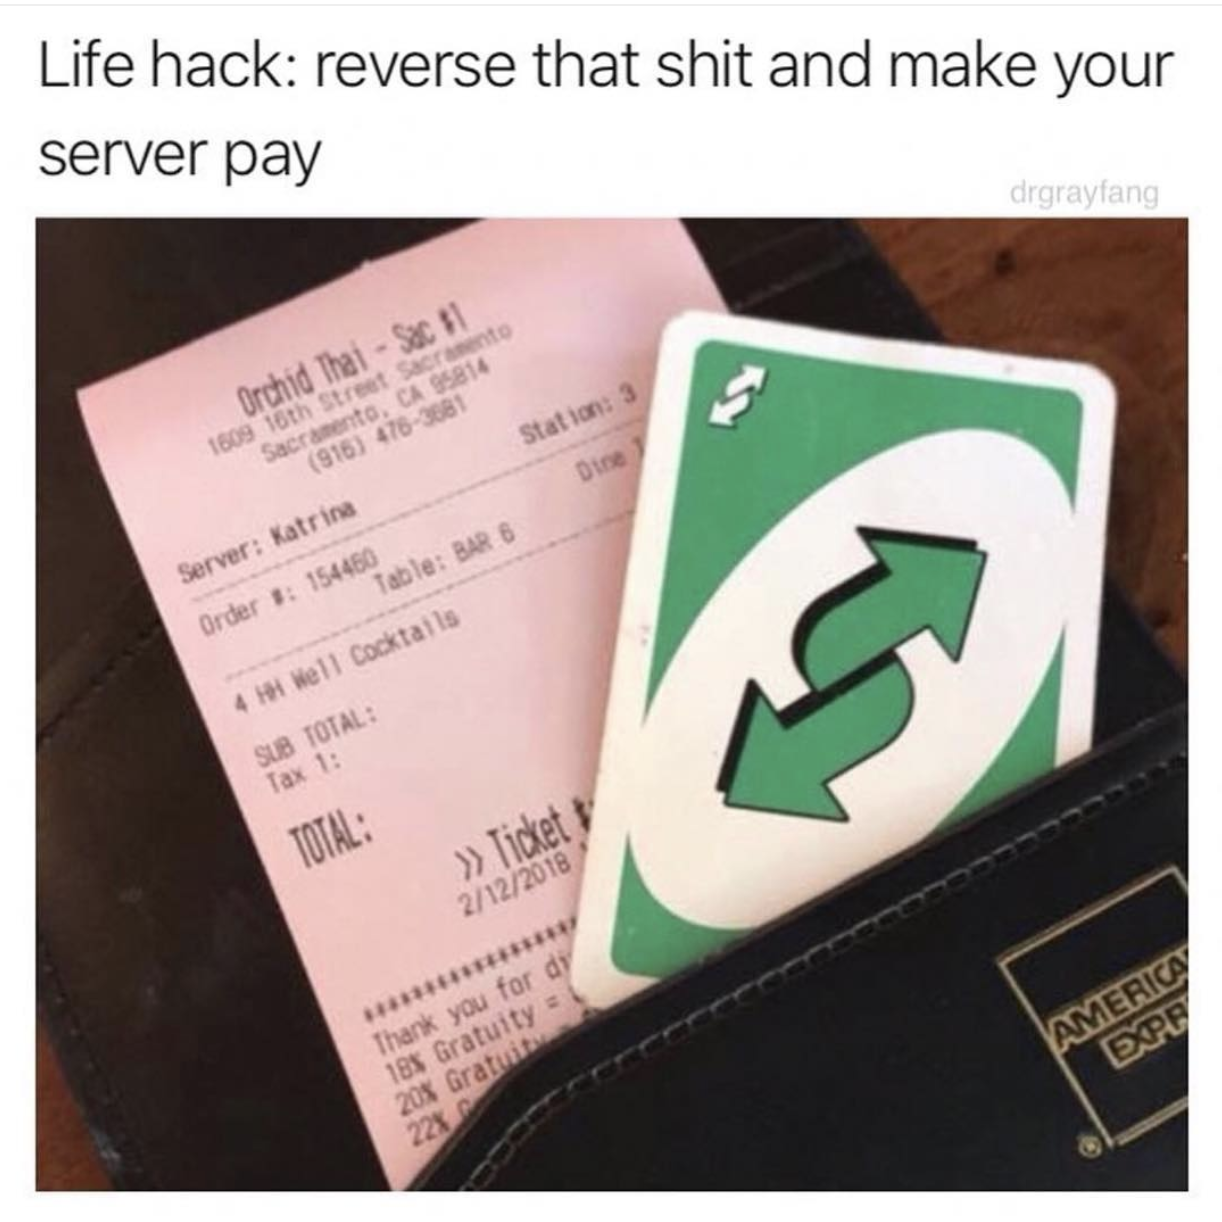 reverse meme - Life hack reverse that shit and make your server pay Orchid Thai Sac 1 oth stret Santo. 514 516 4 Server Katrin Order 154650 Tables Bare Well Cocktails Sub Total 1 Tax Total >> Tickets 2122018 Thank you for dy 185 Gratuity 20% Gratu